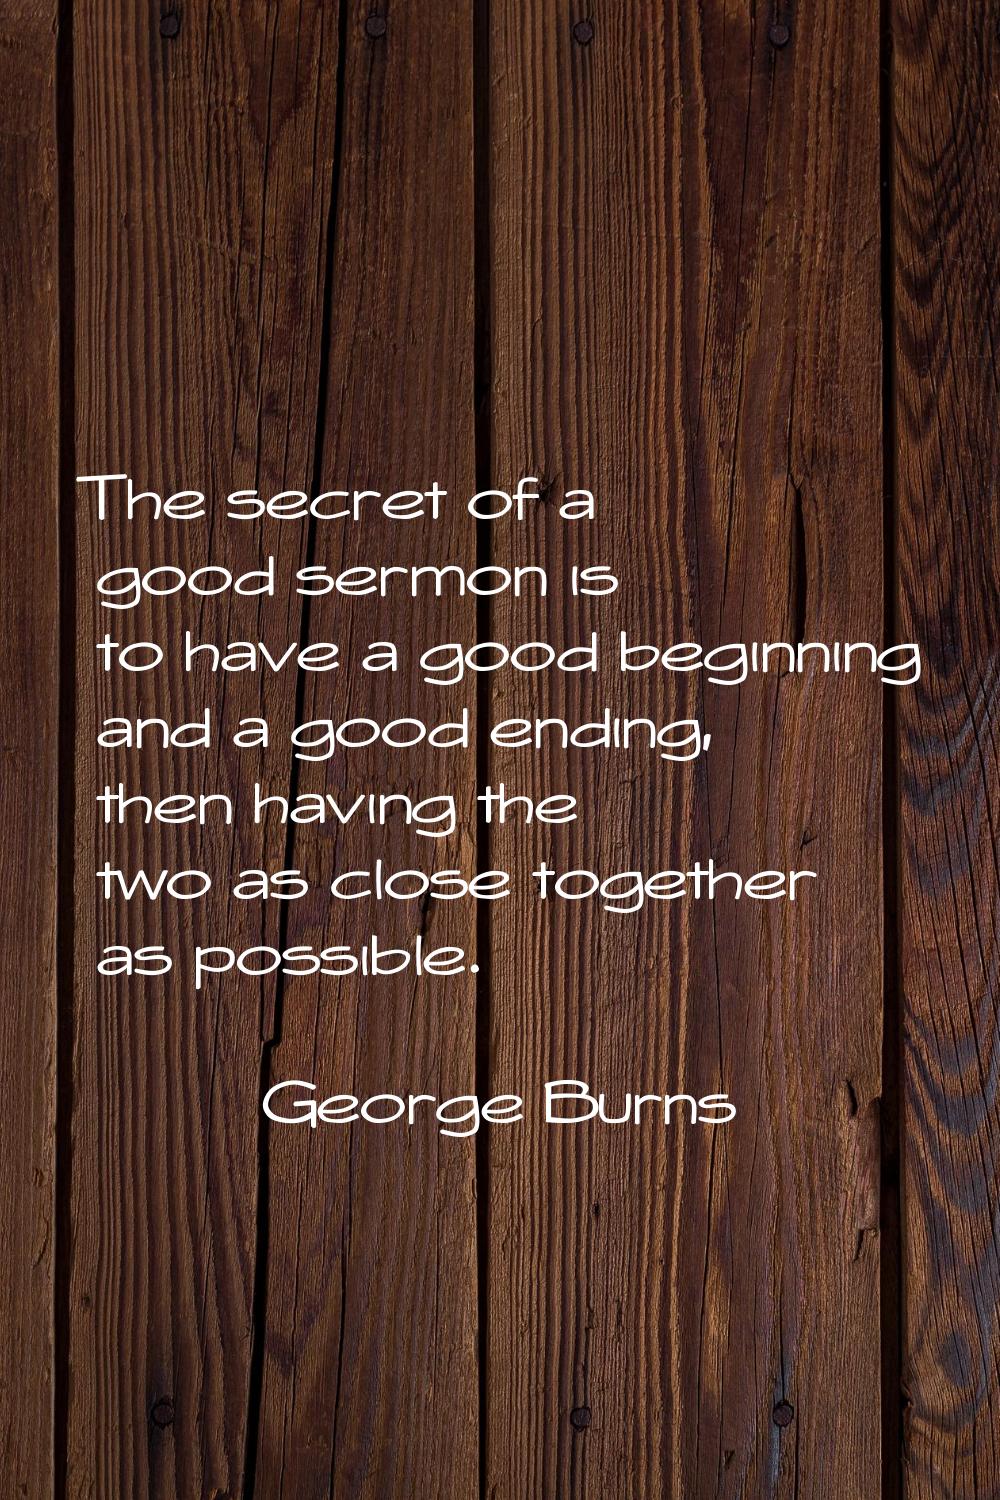 The secret of a good sermon is to have a good beginning and a good ending, then having the two as c